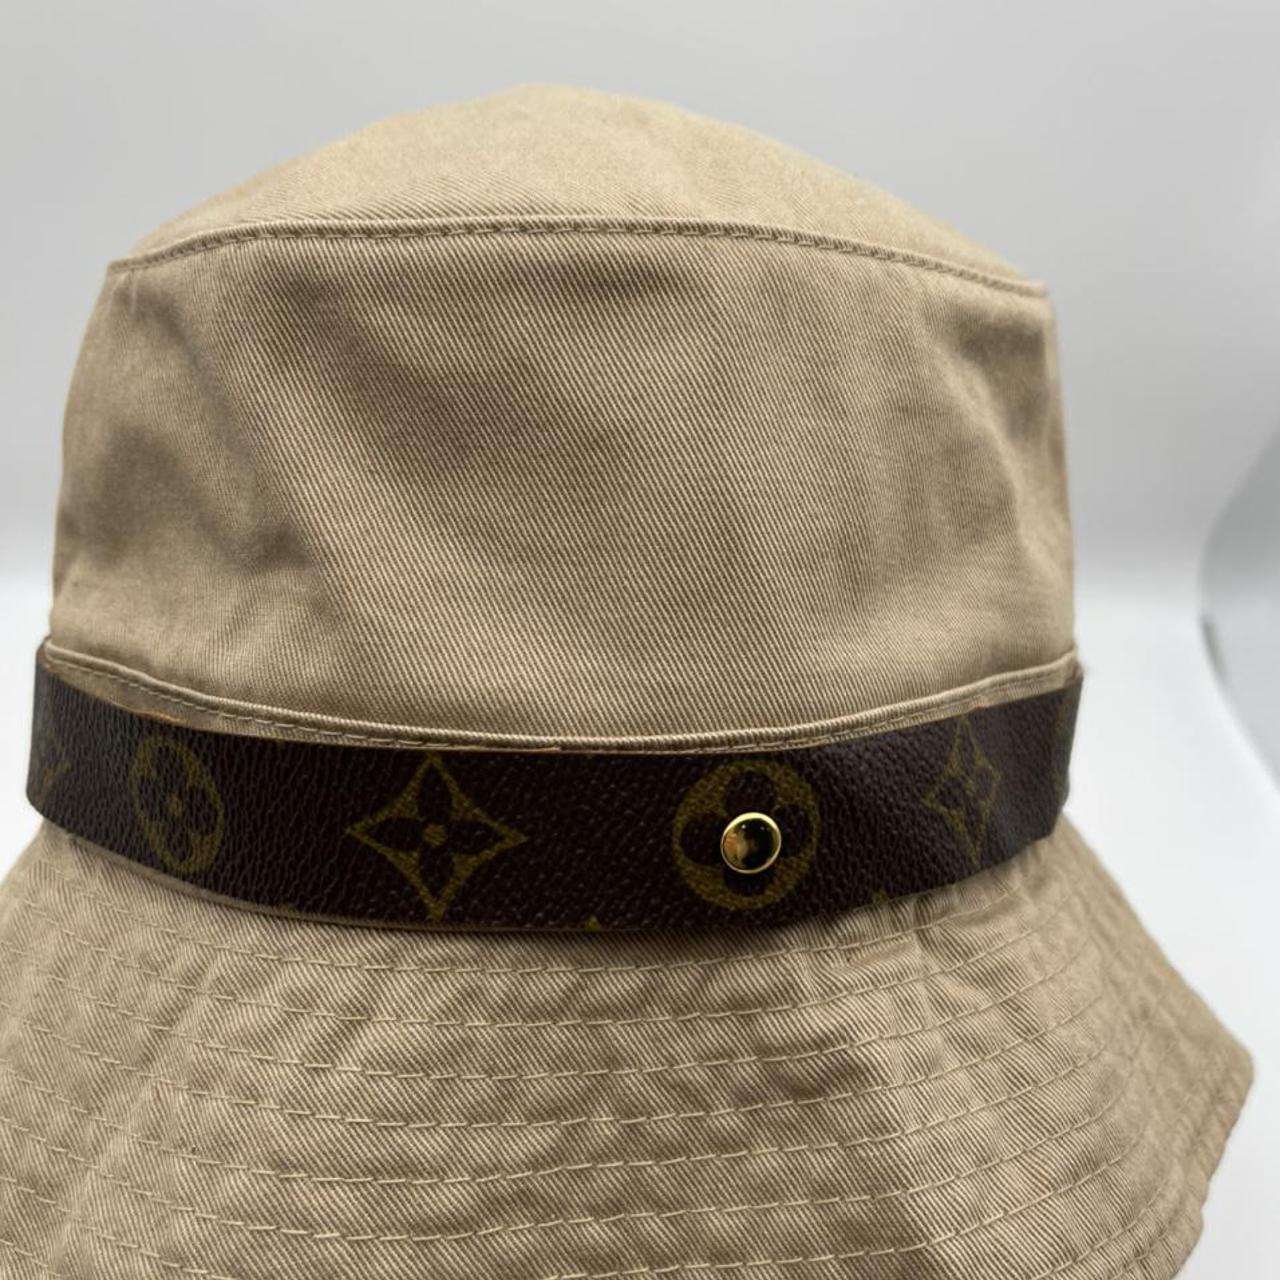 Upcycled Louis Vuitton trucker hat. Has the ponytail - Depop